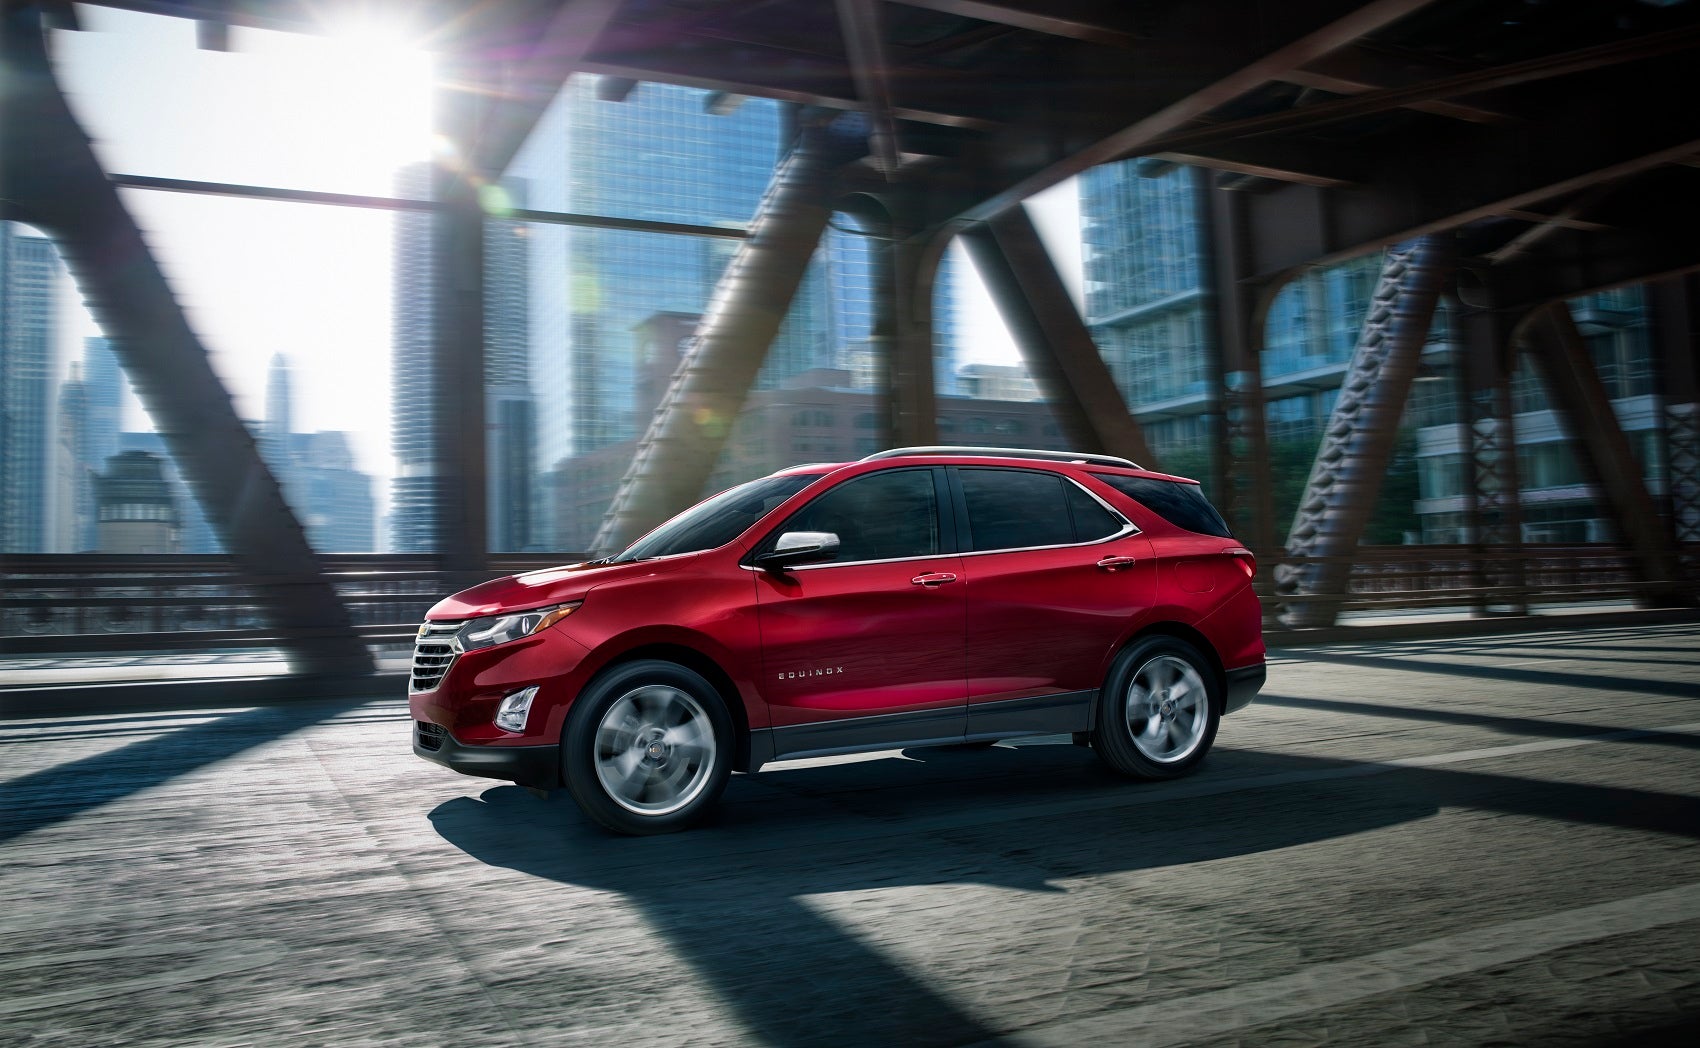 Chevy Equinox Noblesville IN